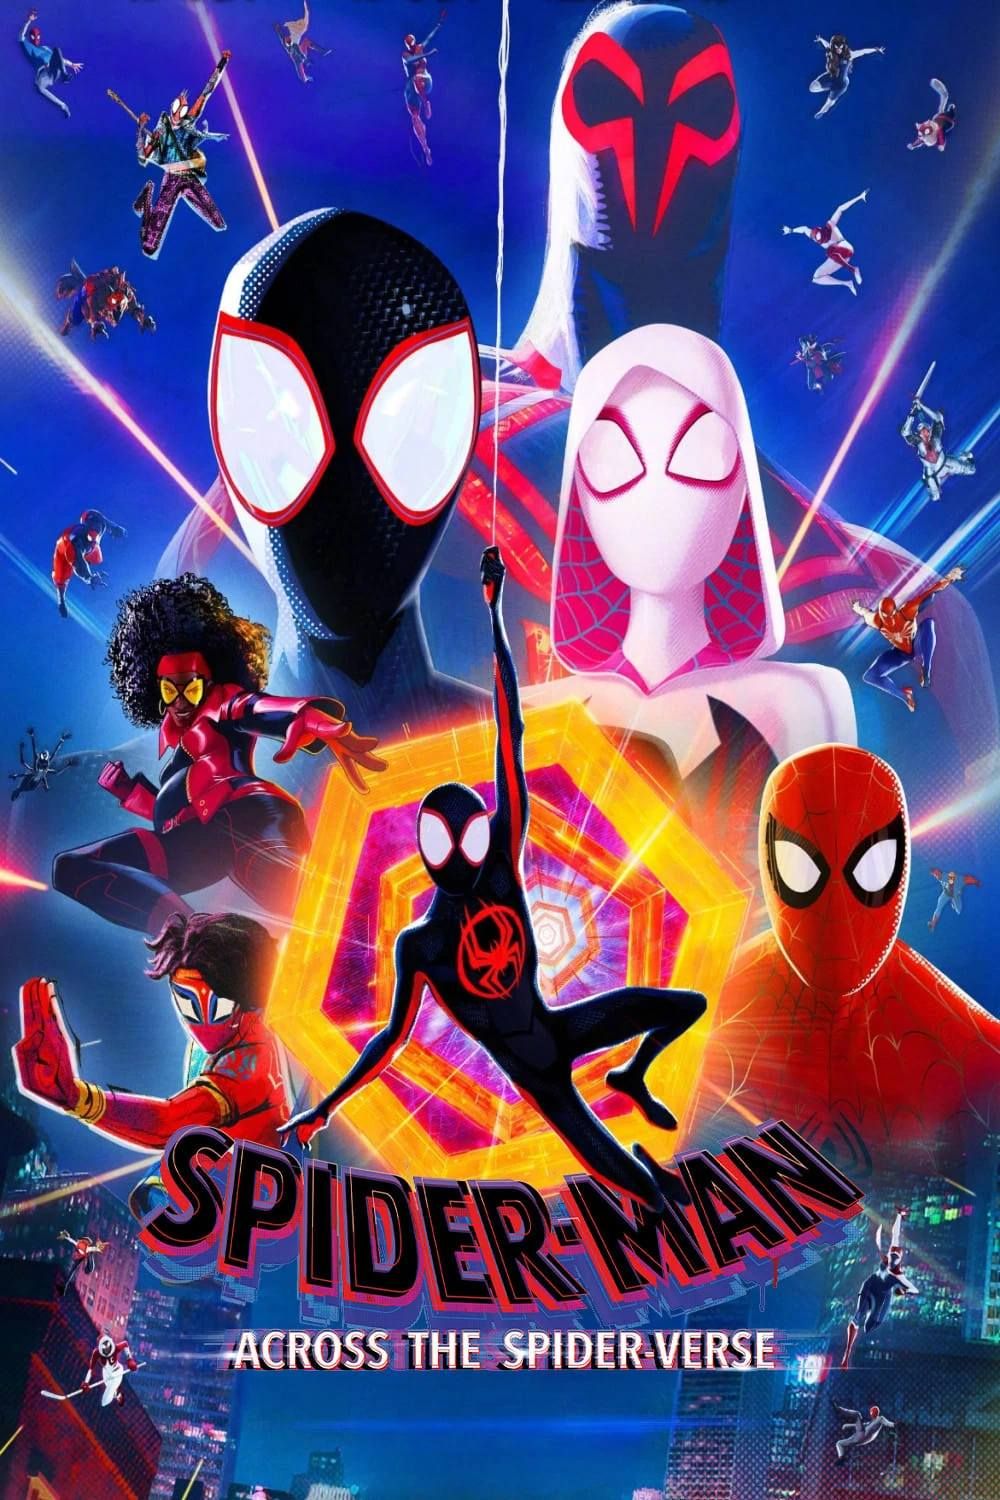 Family Movie @ Main: Spider-Man: Across the Spider-Verse (2nd showing)